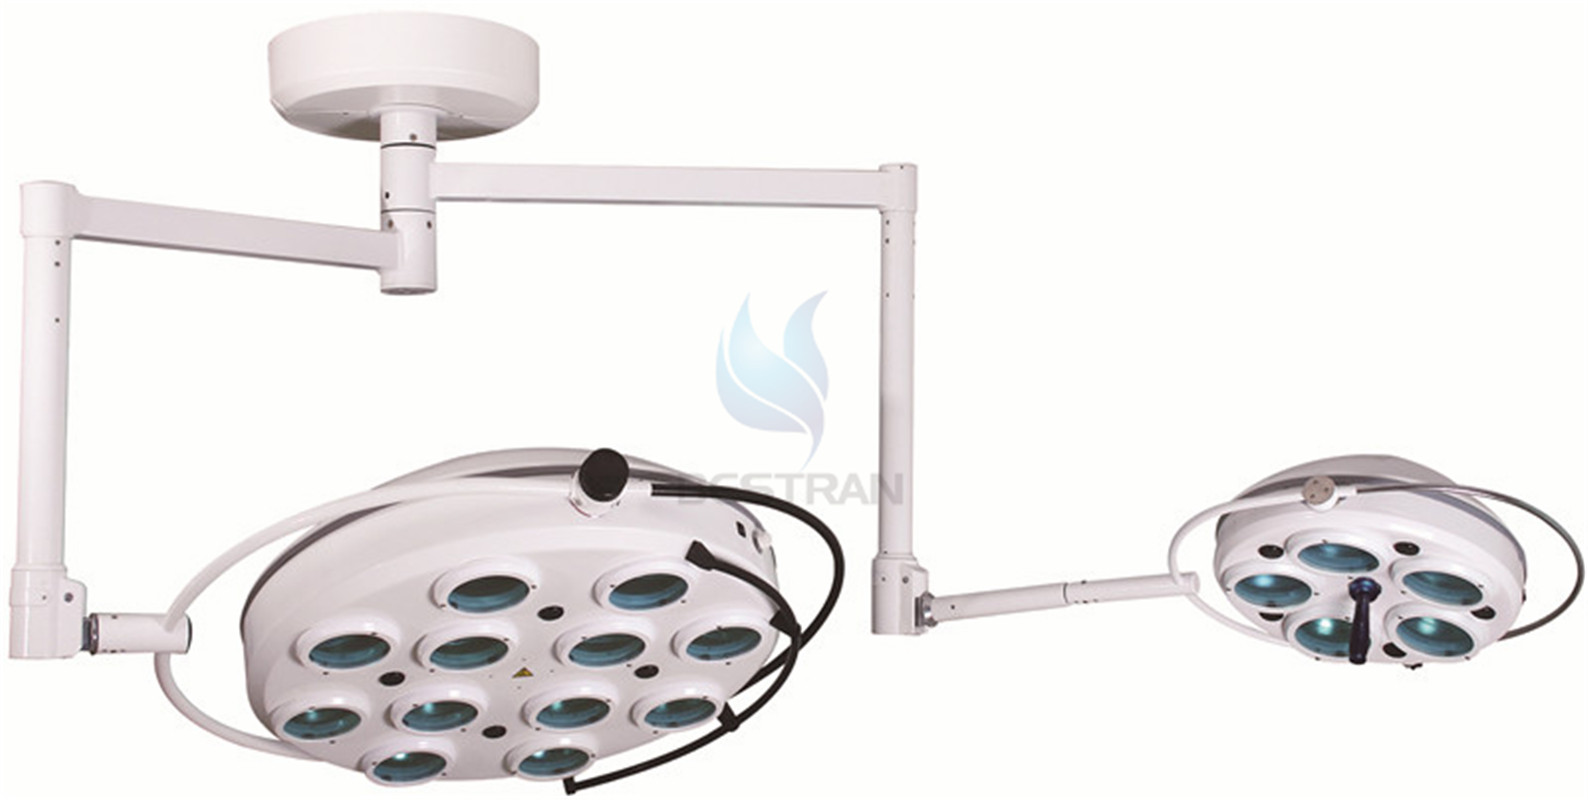 Cold light operating lamp 